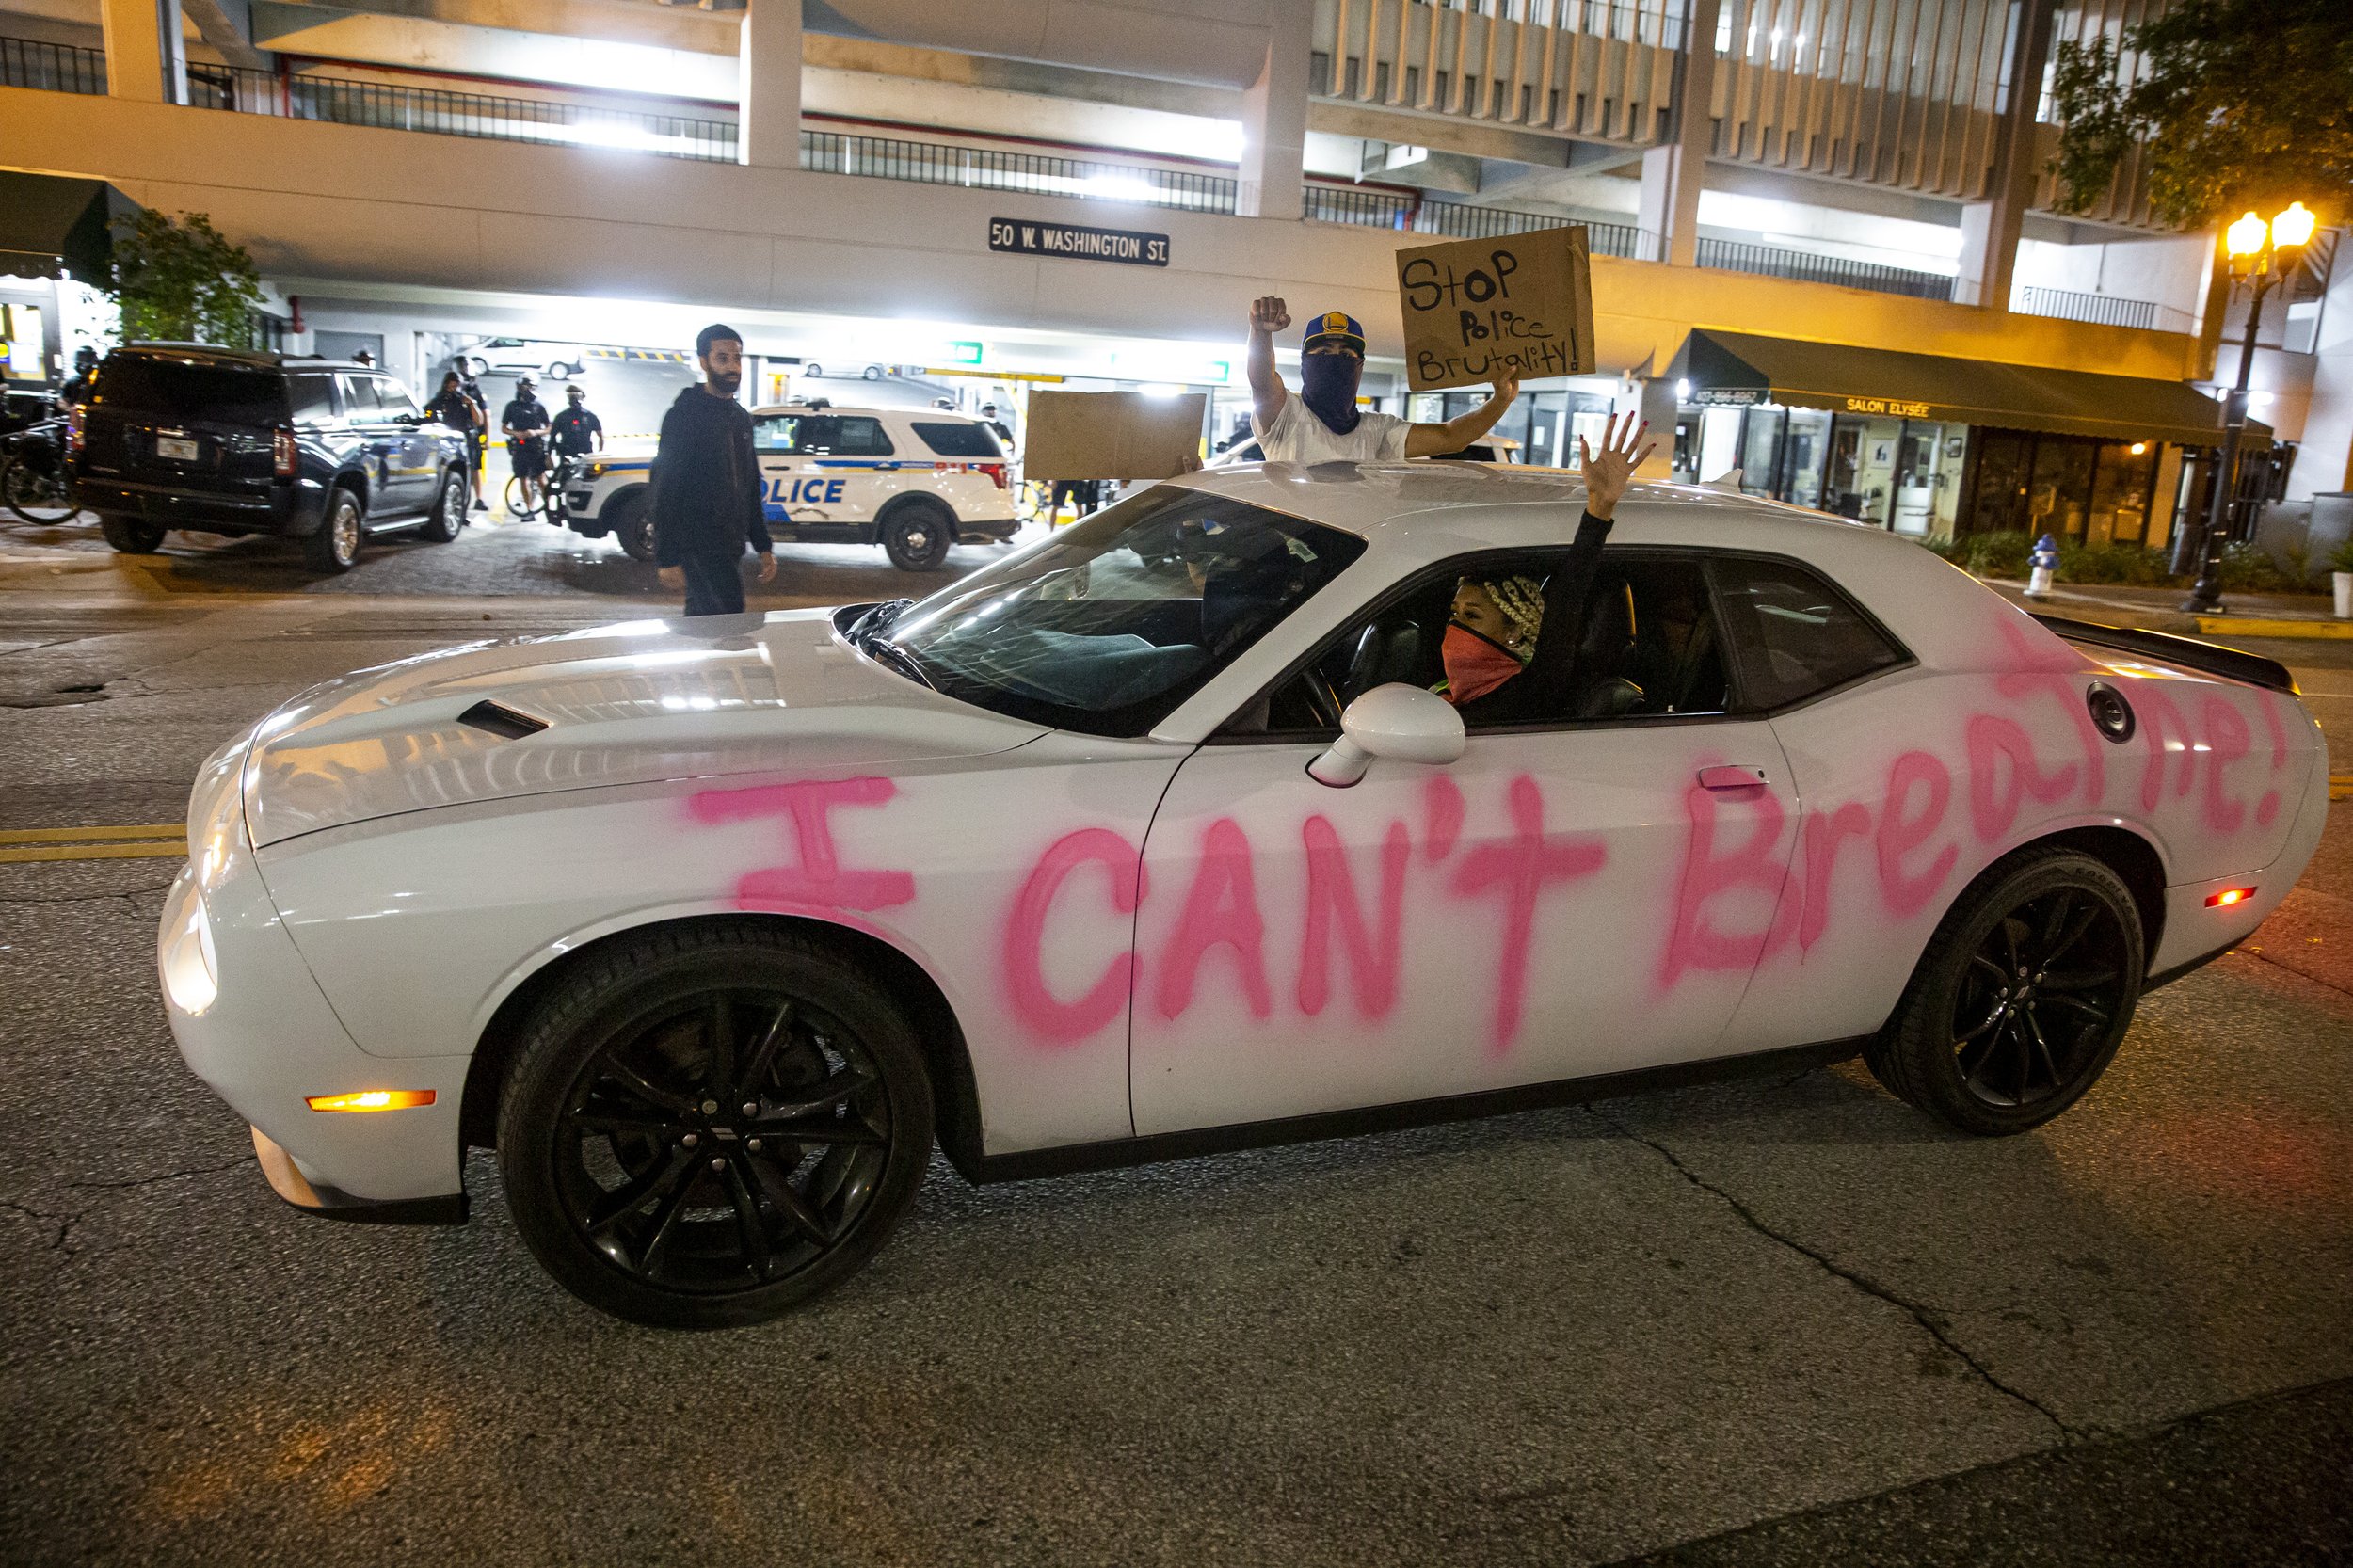  A car passes by with "I can't breathe" painted on the side during a demonstration demanding justice for George Floyd in Orlando on Sunday, May 31, 2020. 